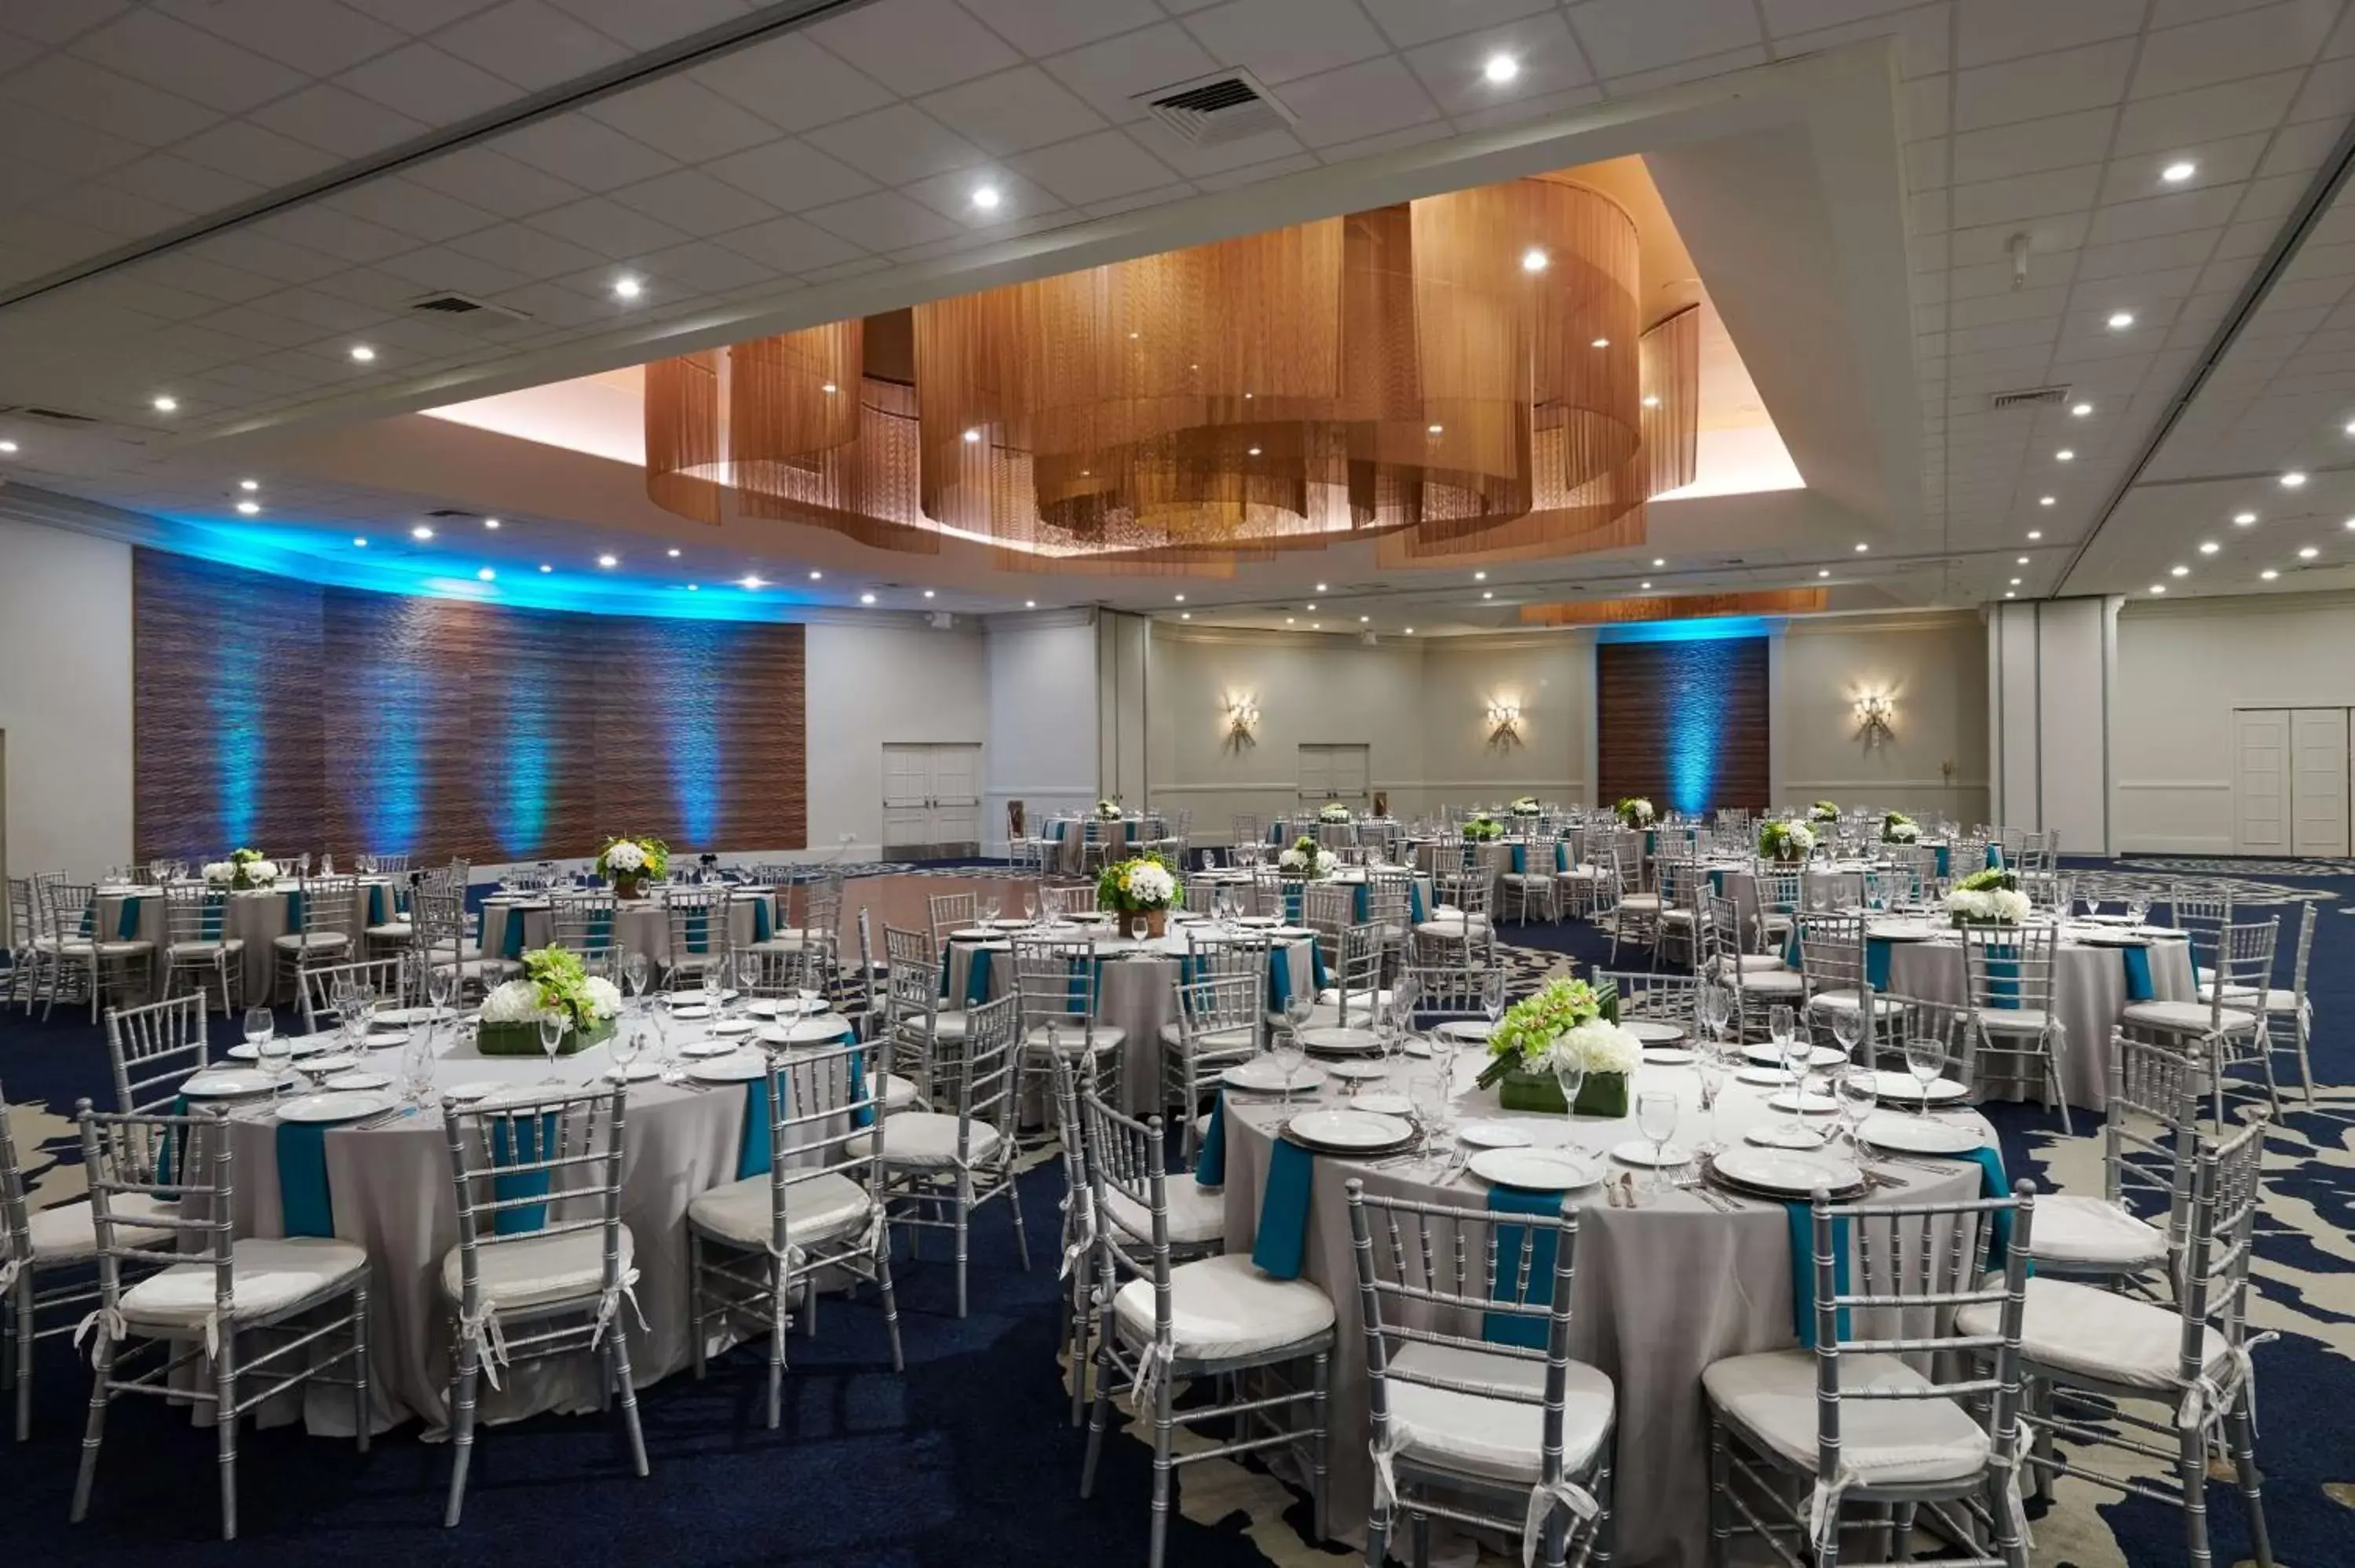 Meeting/conference room, Banquet Facilities in Bahia Mar Fort Lauderdale Beach - DoubleTree by Hilton